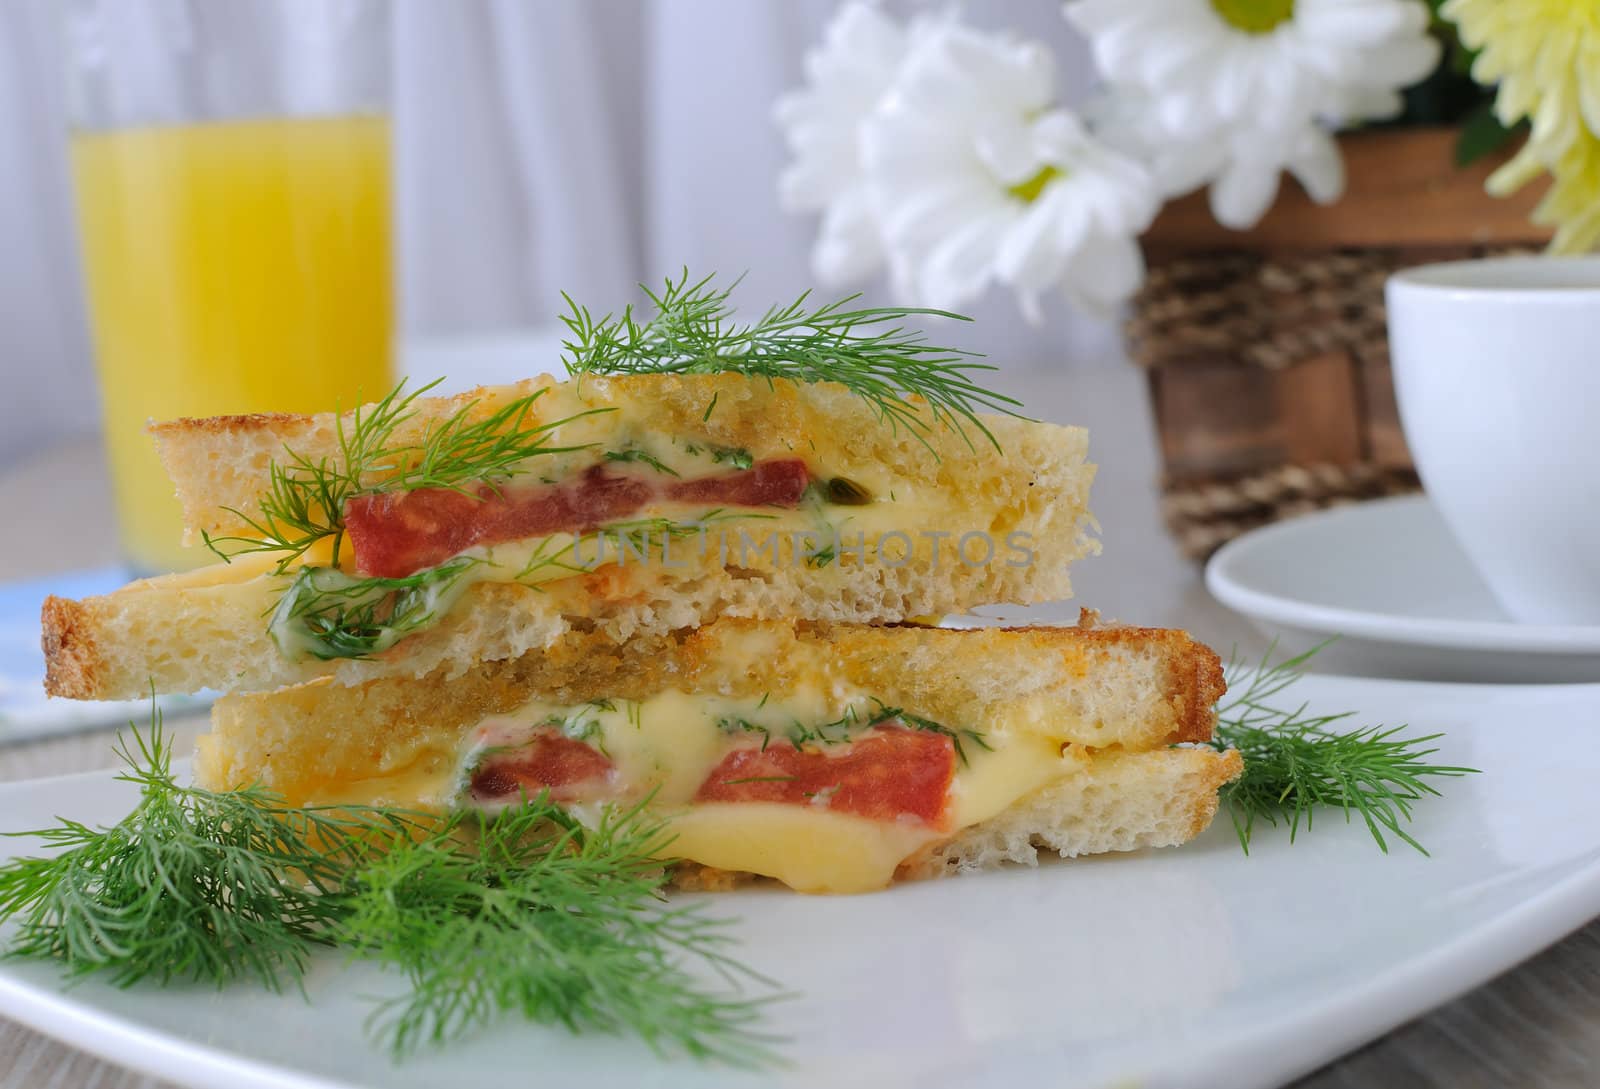 Sandwich with tomato and cheese on a plate with dill